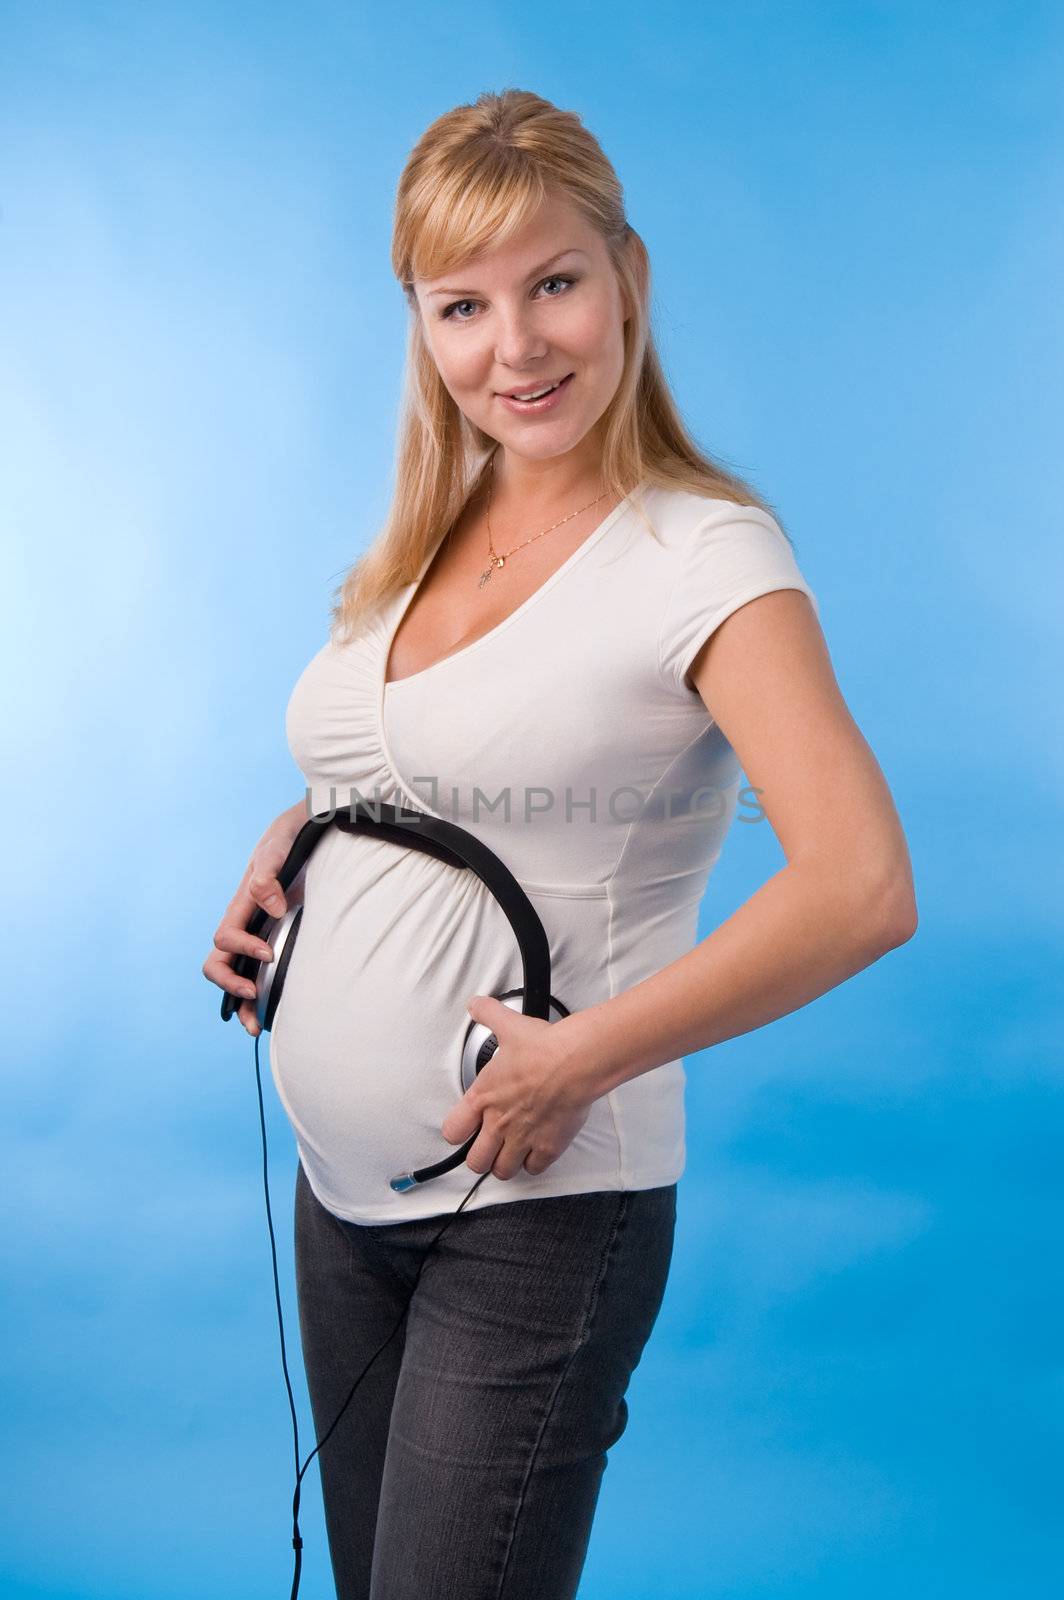 The beautiful pregnant woman with headphones on a stomach.